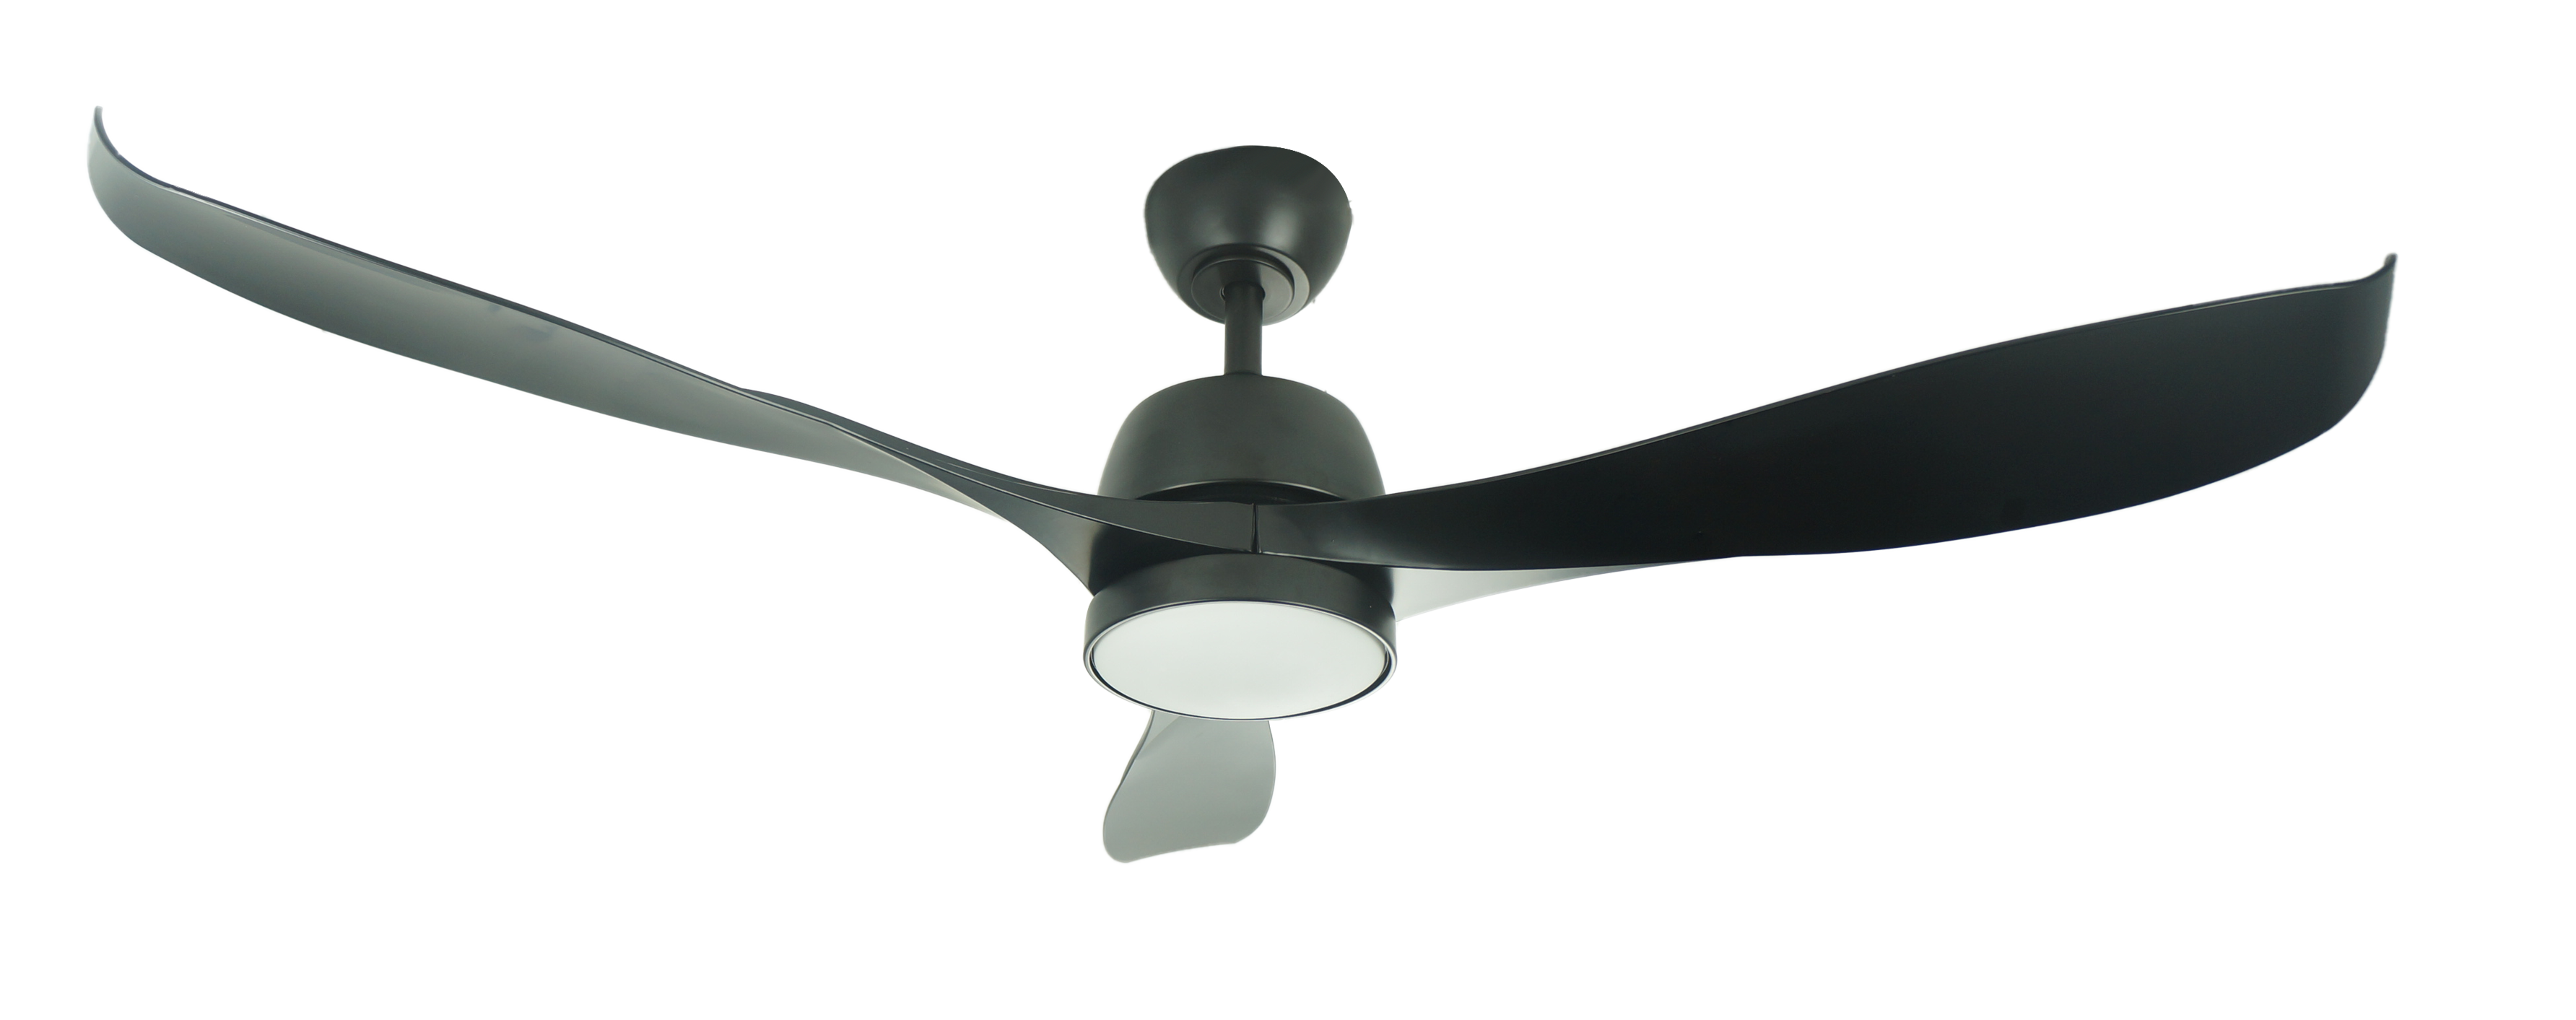 Household Living Room Ceiling Fan Remote Control